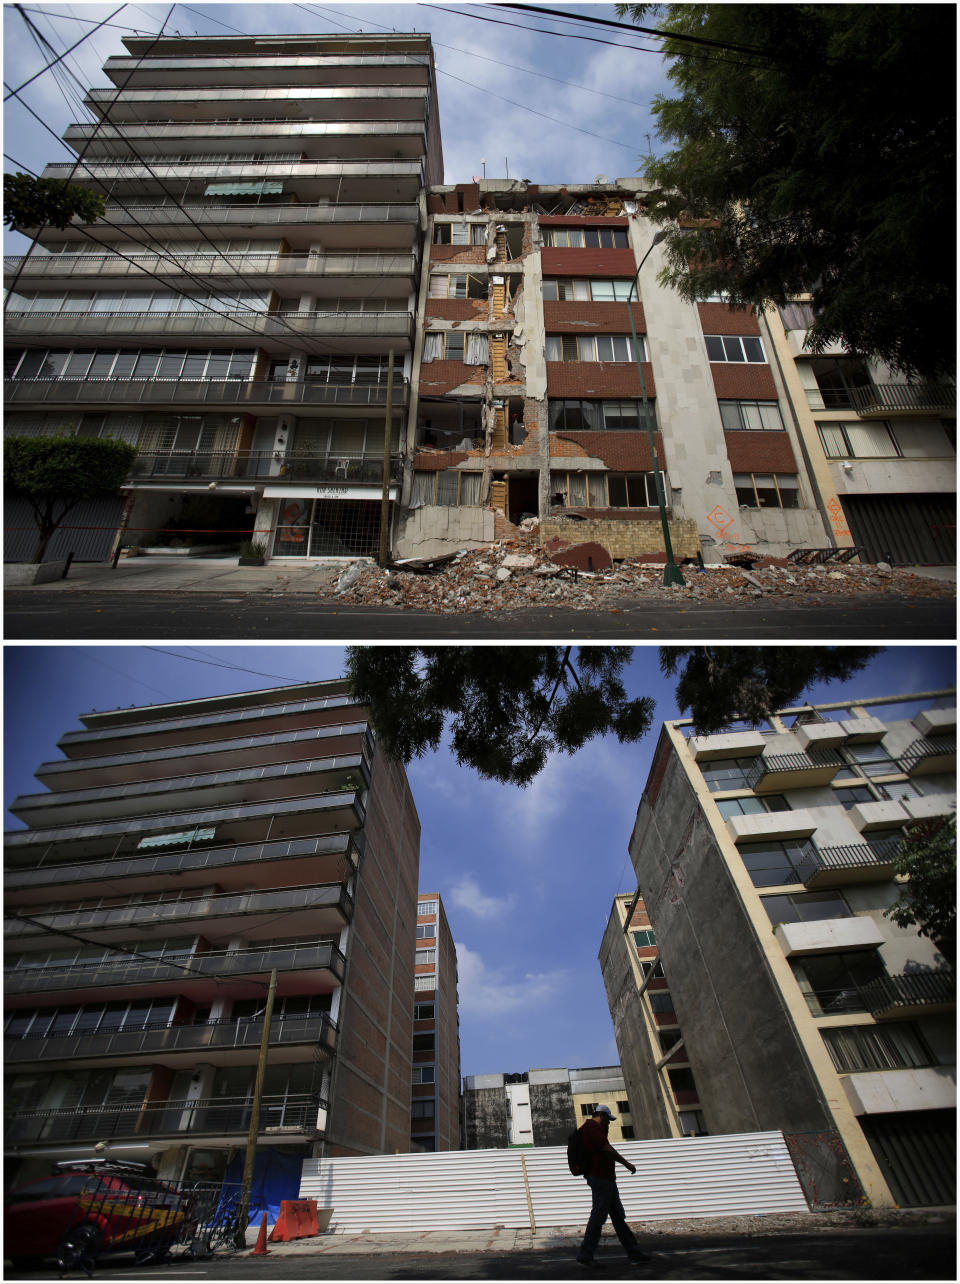 This photo combination shows the site at Patricio Sanz 37, where the lower floor of an apartment building collapsed in last year's 7.1 magnitude earthquake, one month after the quake on Oct. 18, 2017, top, and a year later, on Sept. 17, 2018, after the building had been demolished and the neighboring buildings, damaged in the collapse, were being repaired, in Mexico City. The slow pace of demolition, let alone rebuilding, is frustrating both to those who lost their homes and to those left living amid shattered eyesores that look like they could collapse at any time onto sidewalks and streets still cordoned off after the 2017 quake. (AP Photos/Rebecca Blackwell)